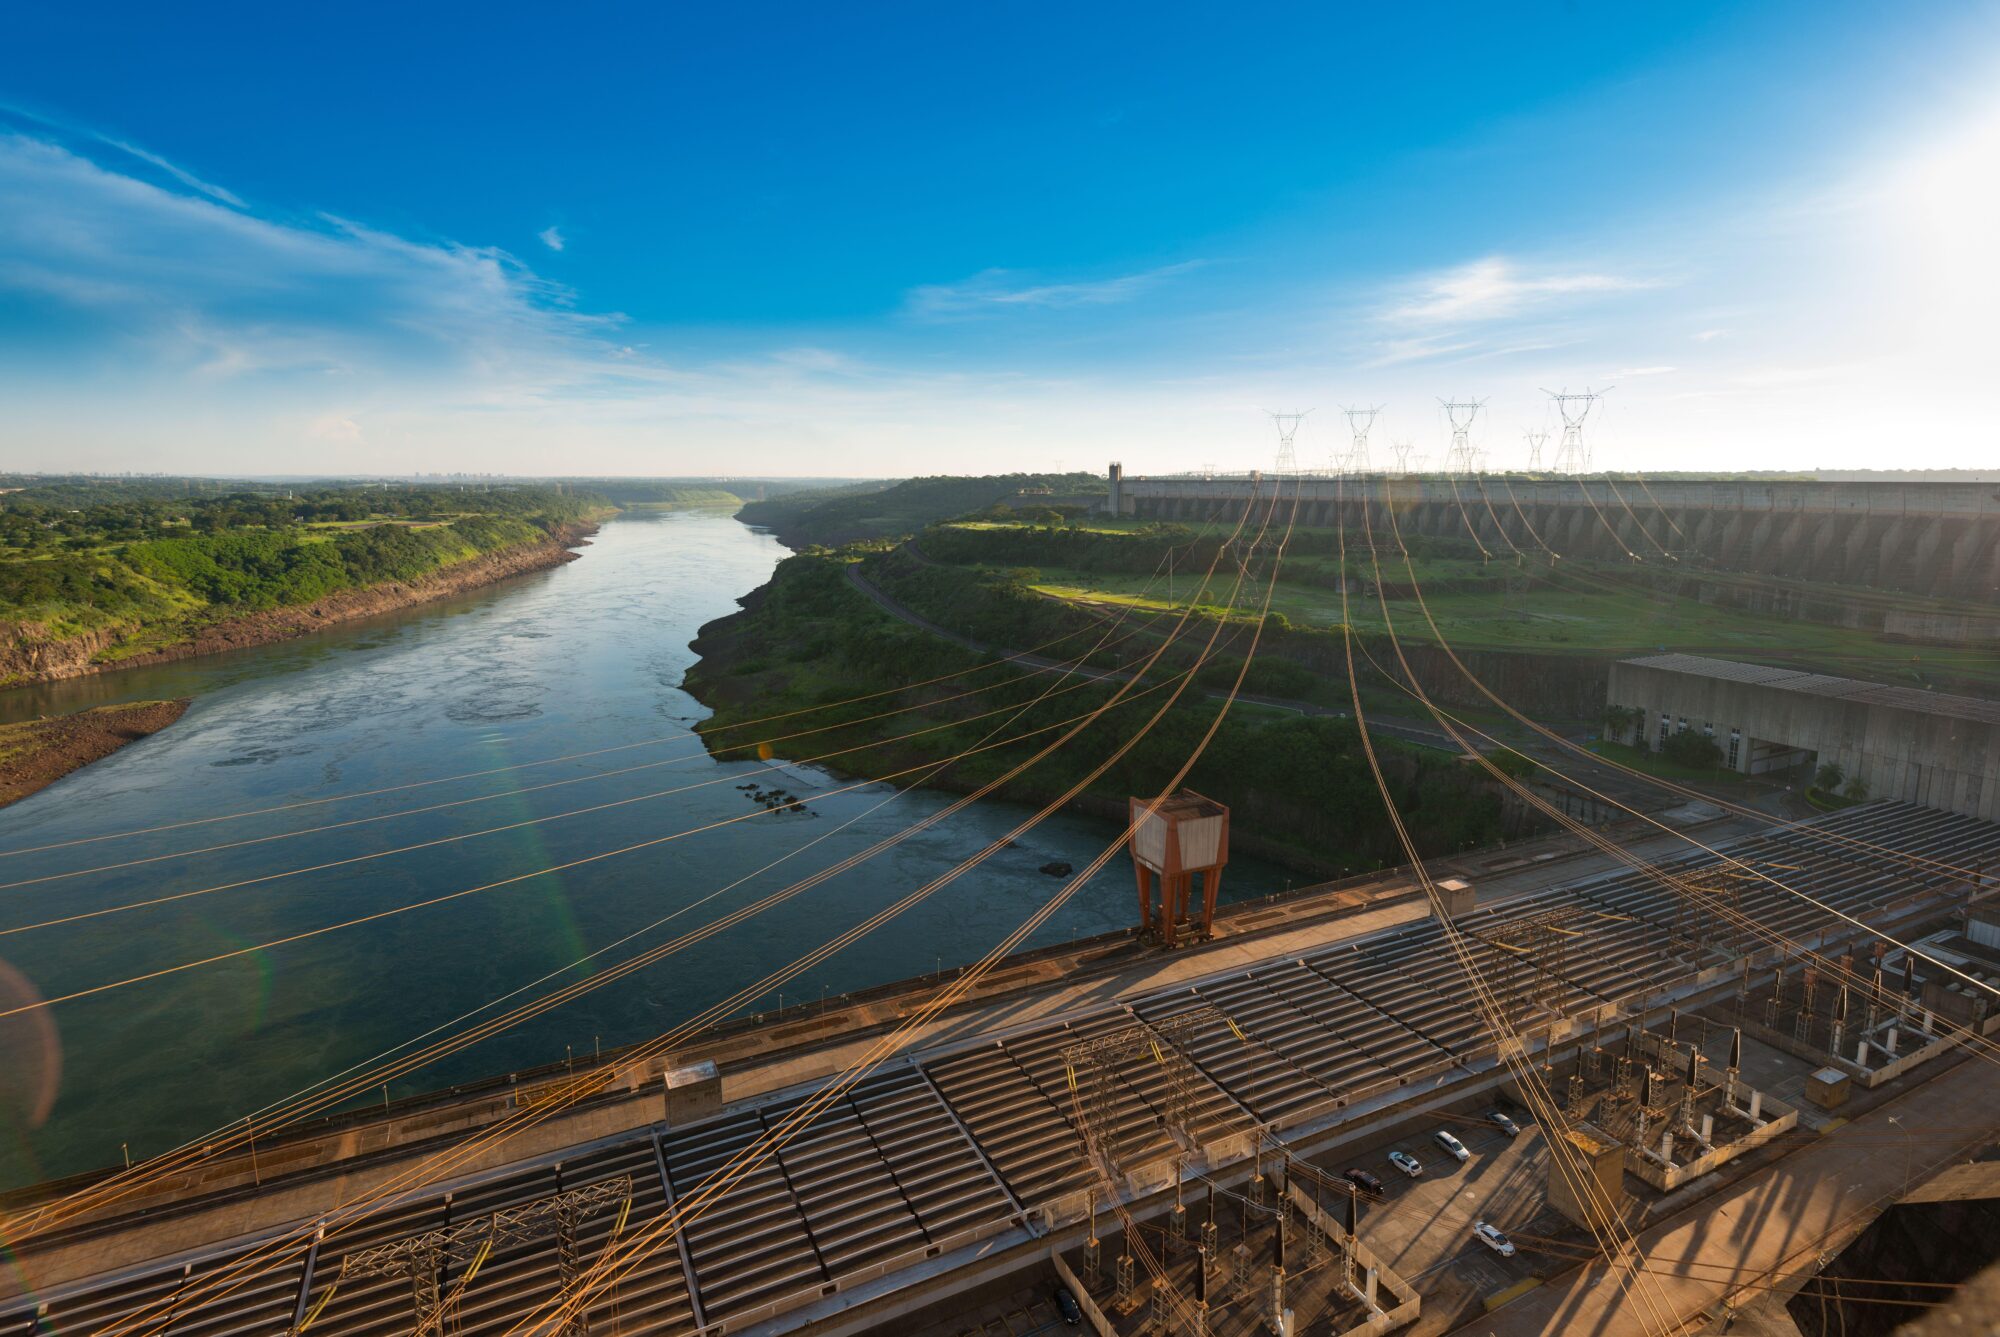 <p>Power lines coming out from Itaipu hydroelectric dam in southern Brazil. This area of the country is expected to face increased rainfall (Image: Jose Luis Stephens / Alamy).</p>